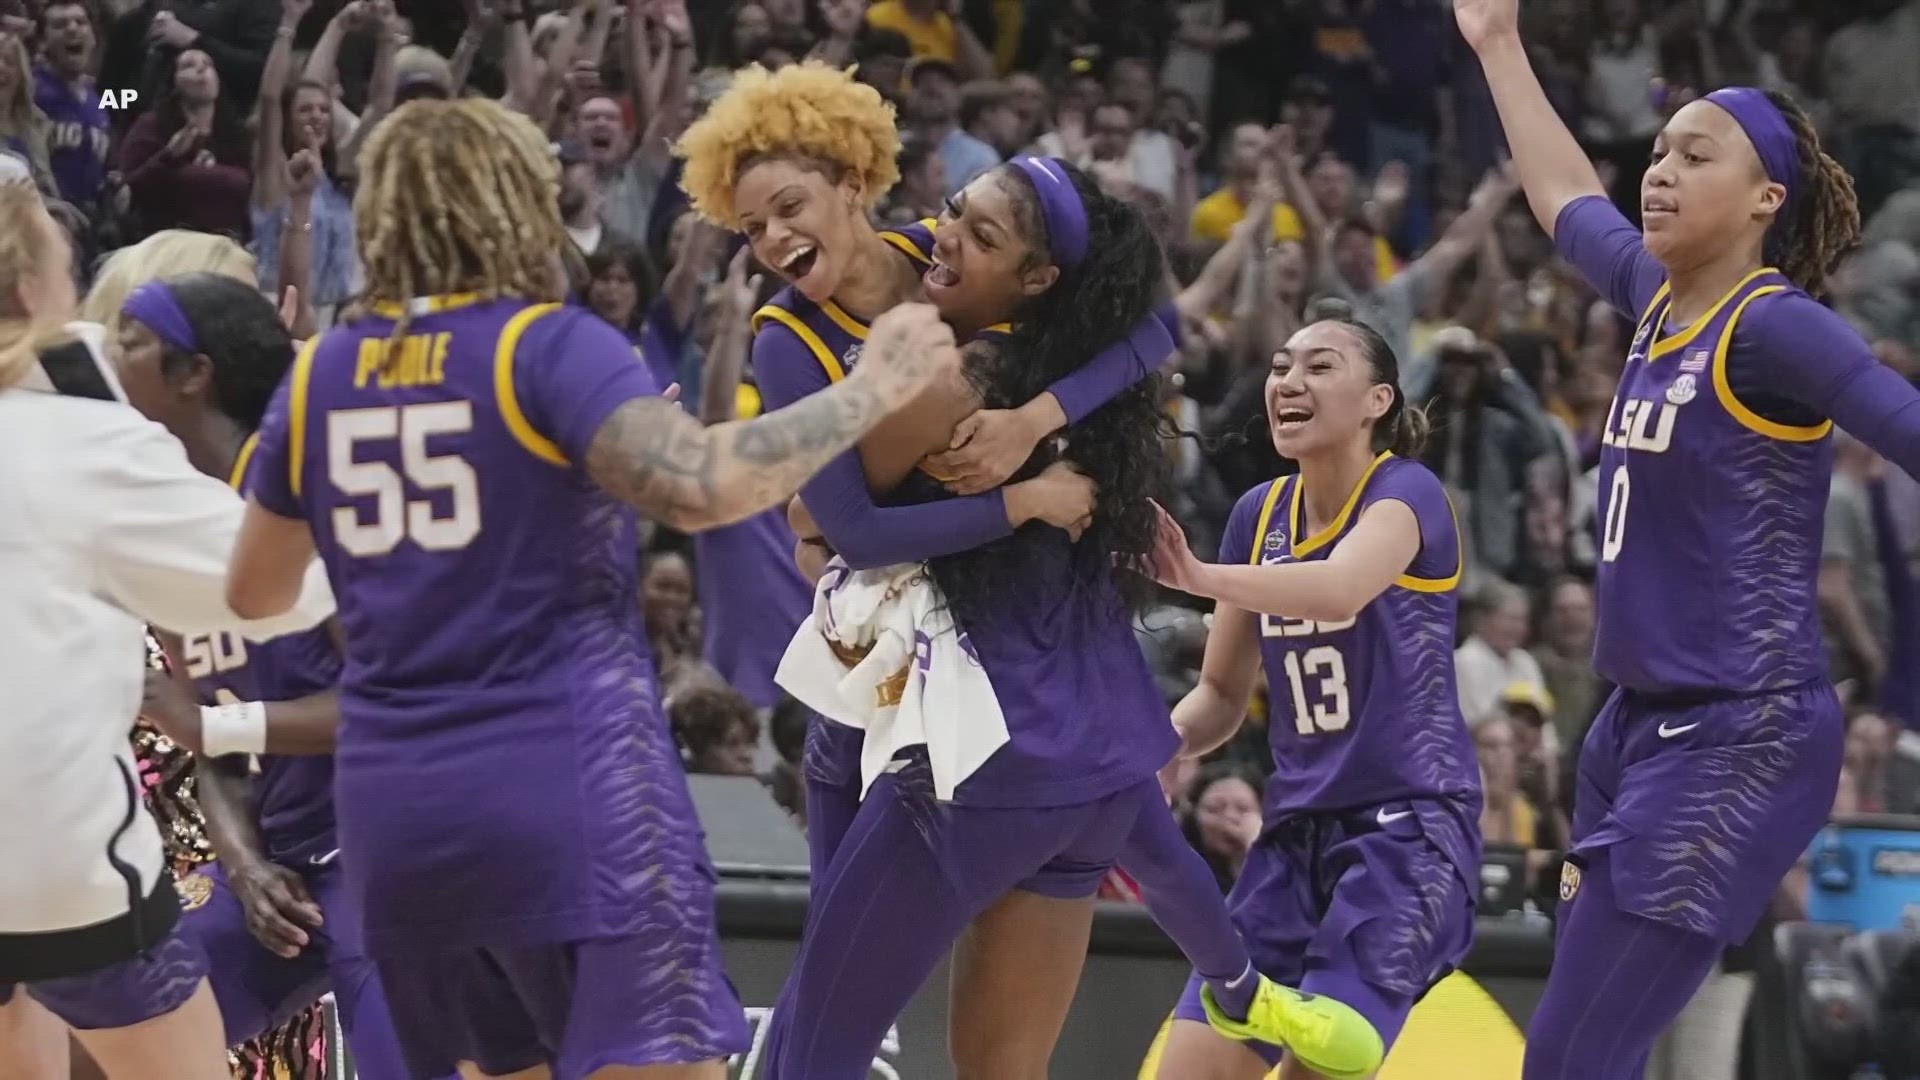 Womens NCAA Final Four and title game break records kcentv